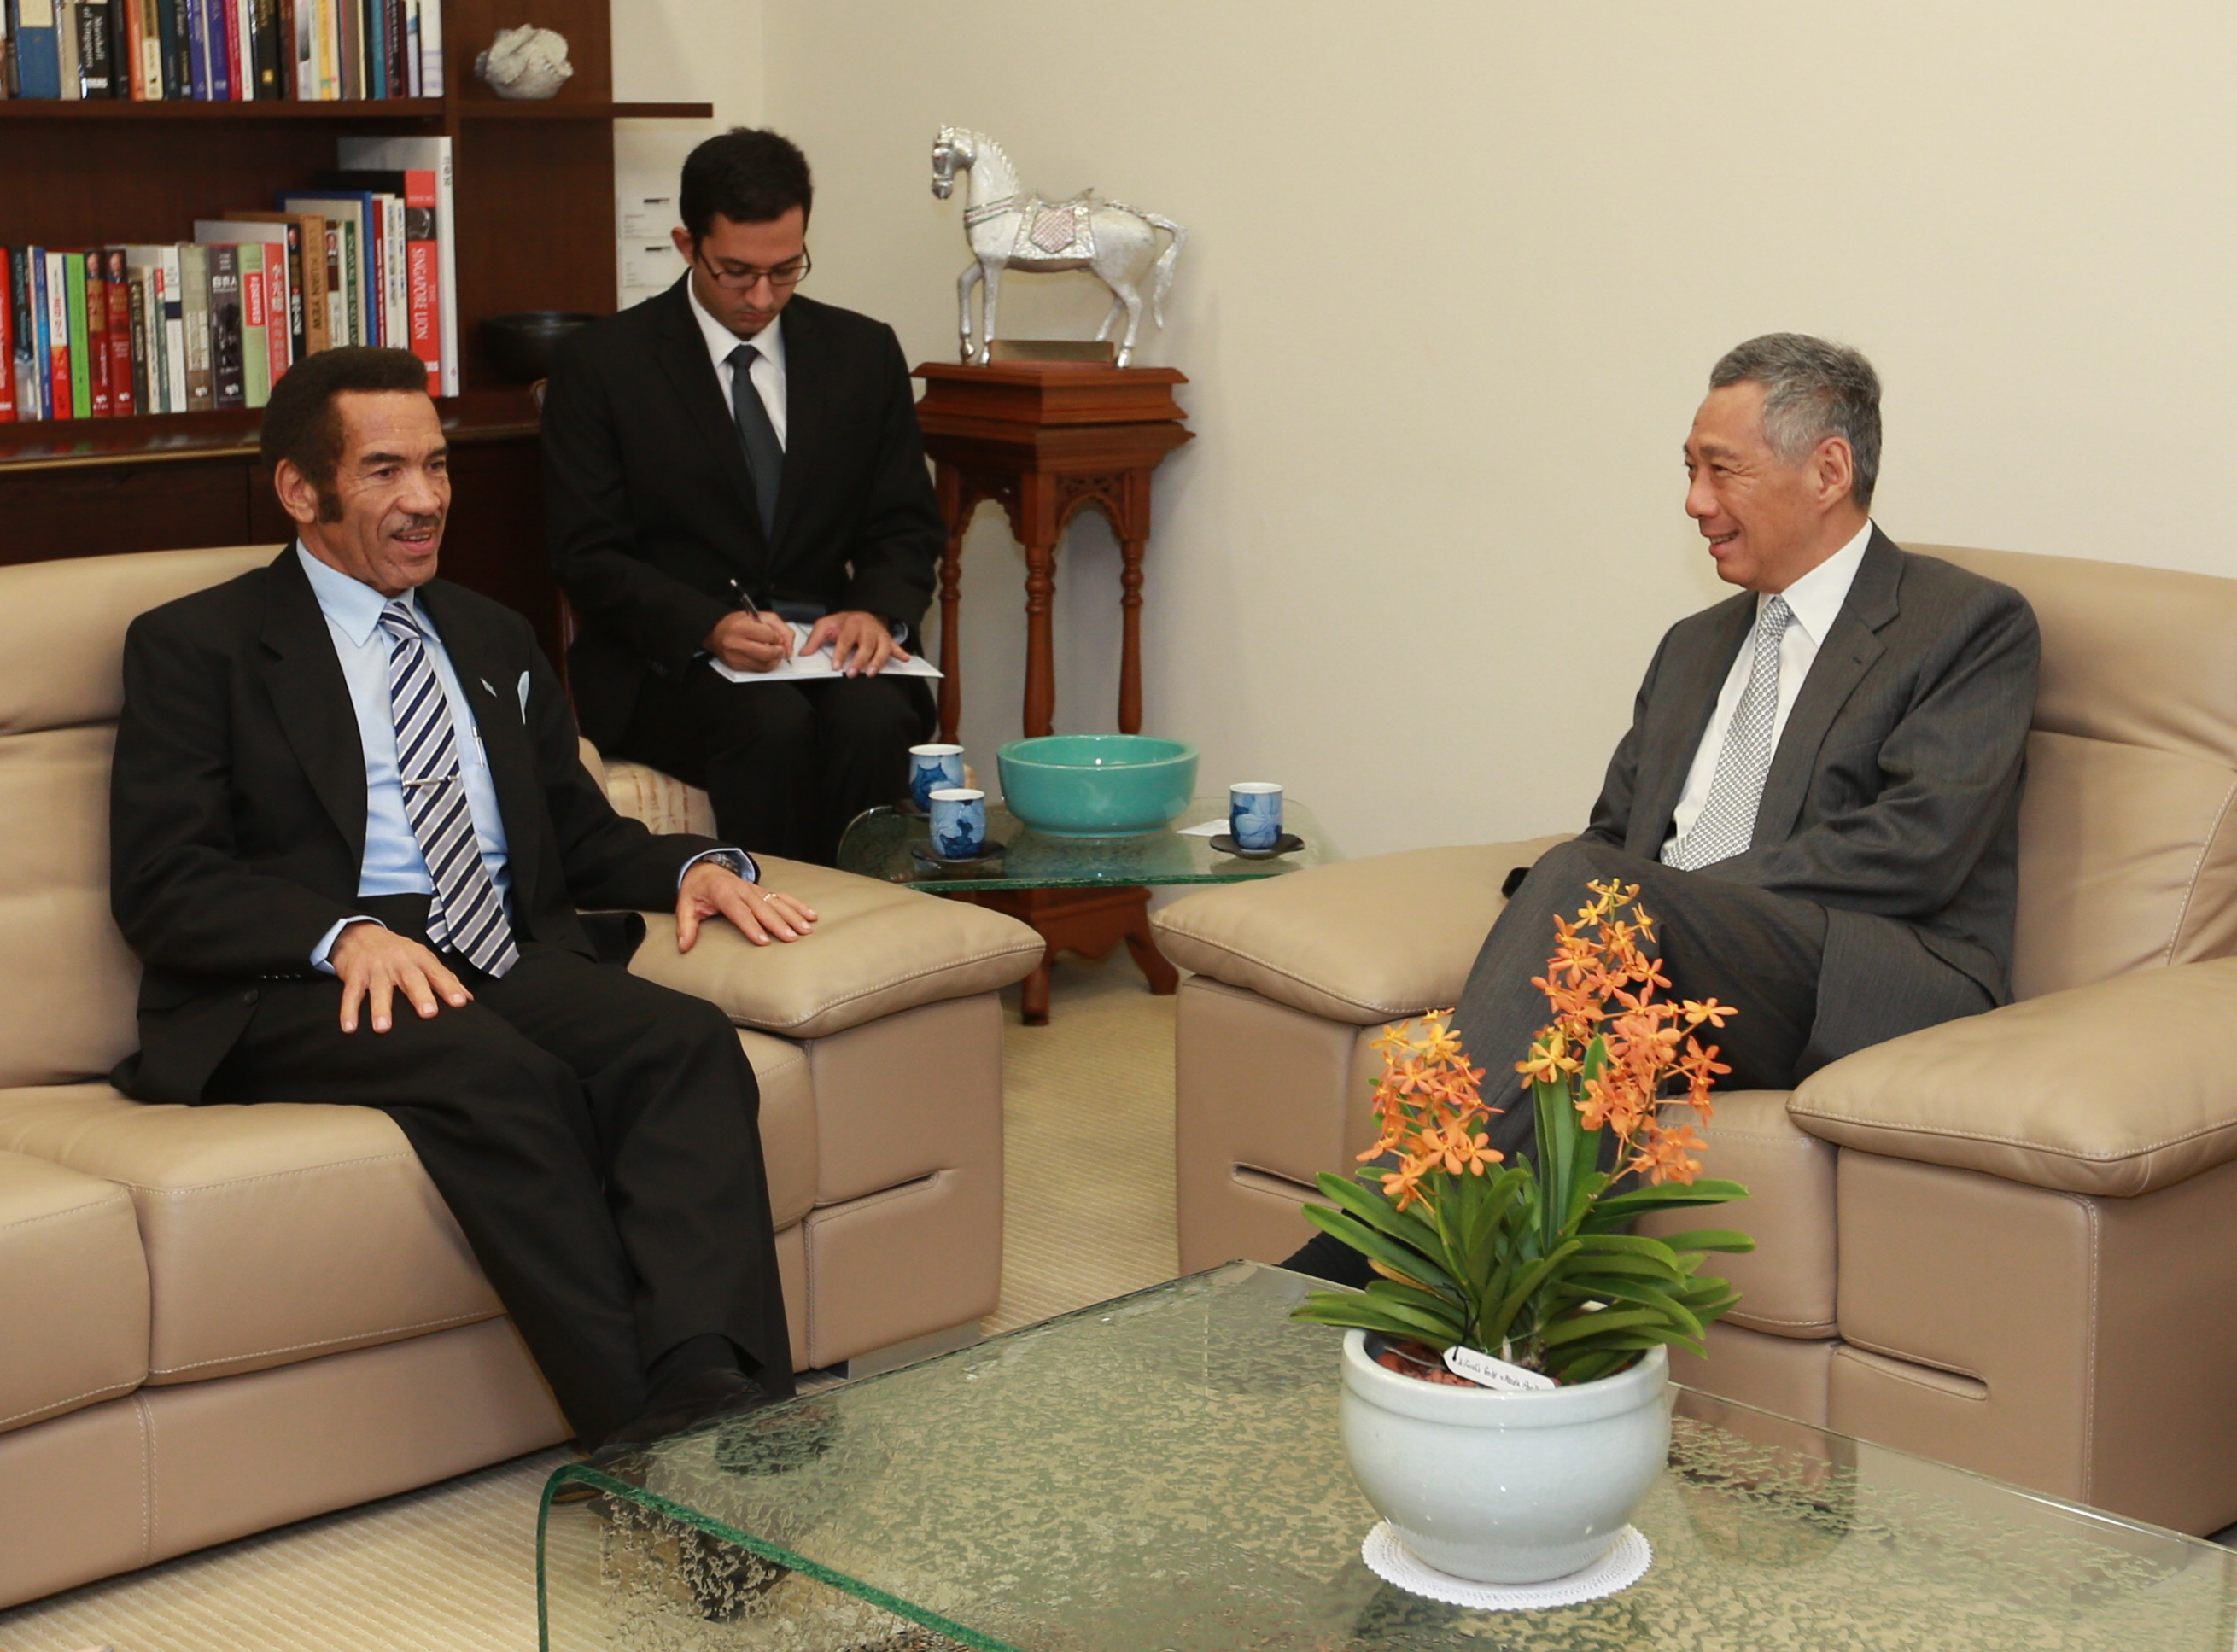 PM Lee Hsien Loong meeting with Botswana President Ian Khama on 24 Oct 2014 (MCI Photo by Terence Tan)